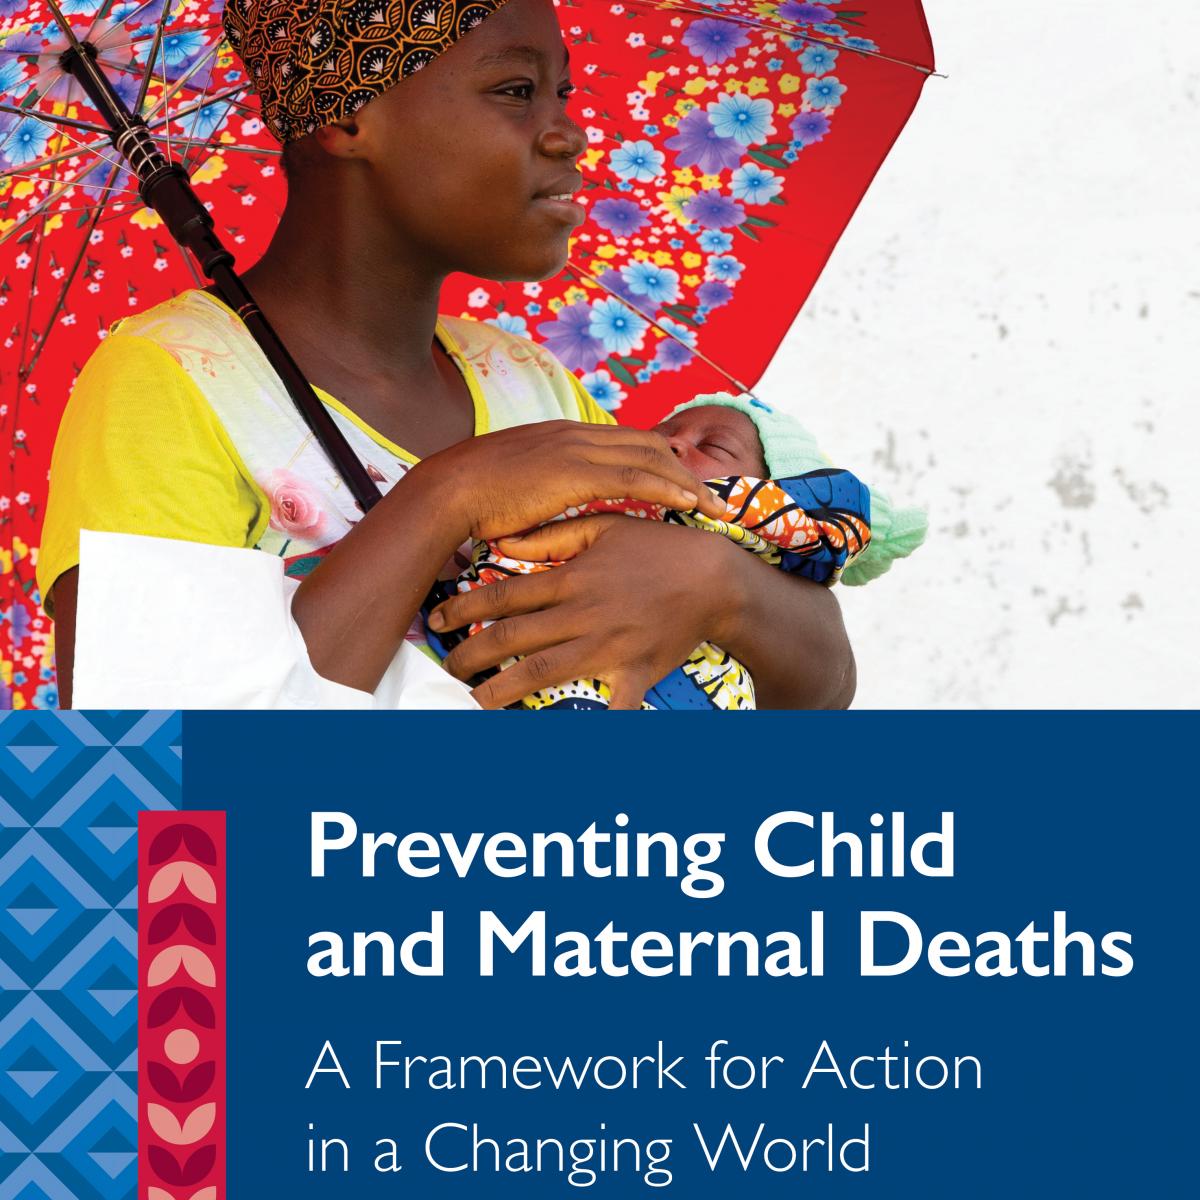 A Decade of Progress and Action for the Future: Preventing Child and Maternal Deaths, 2023-2030